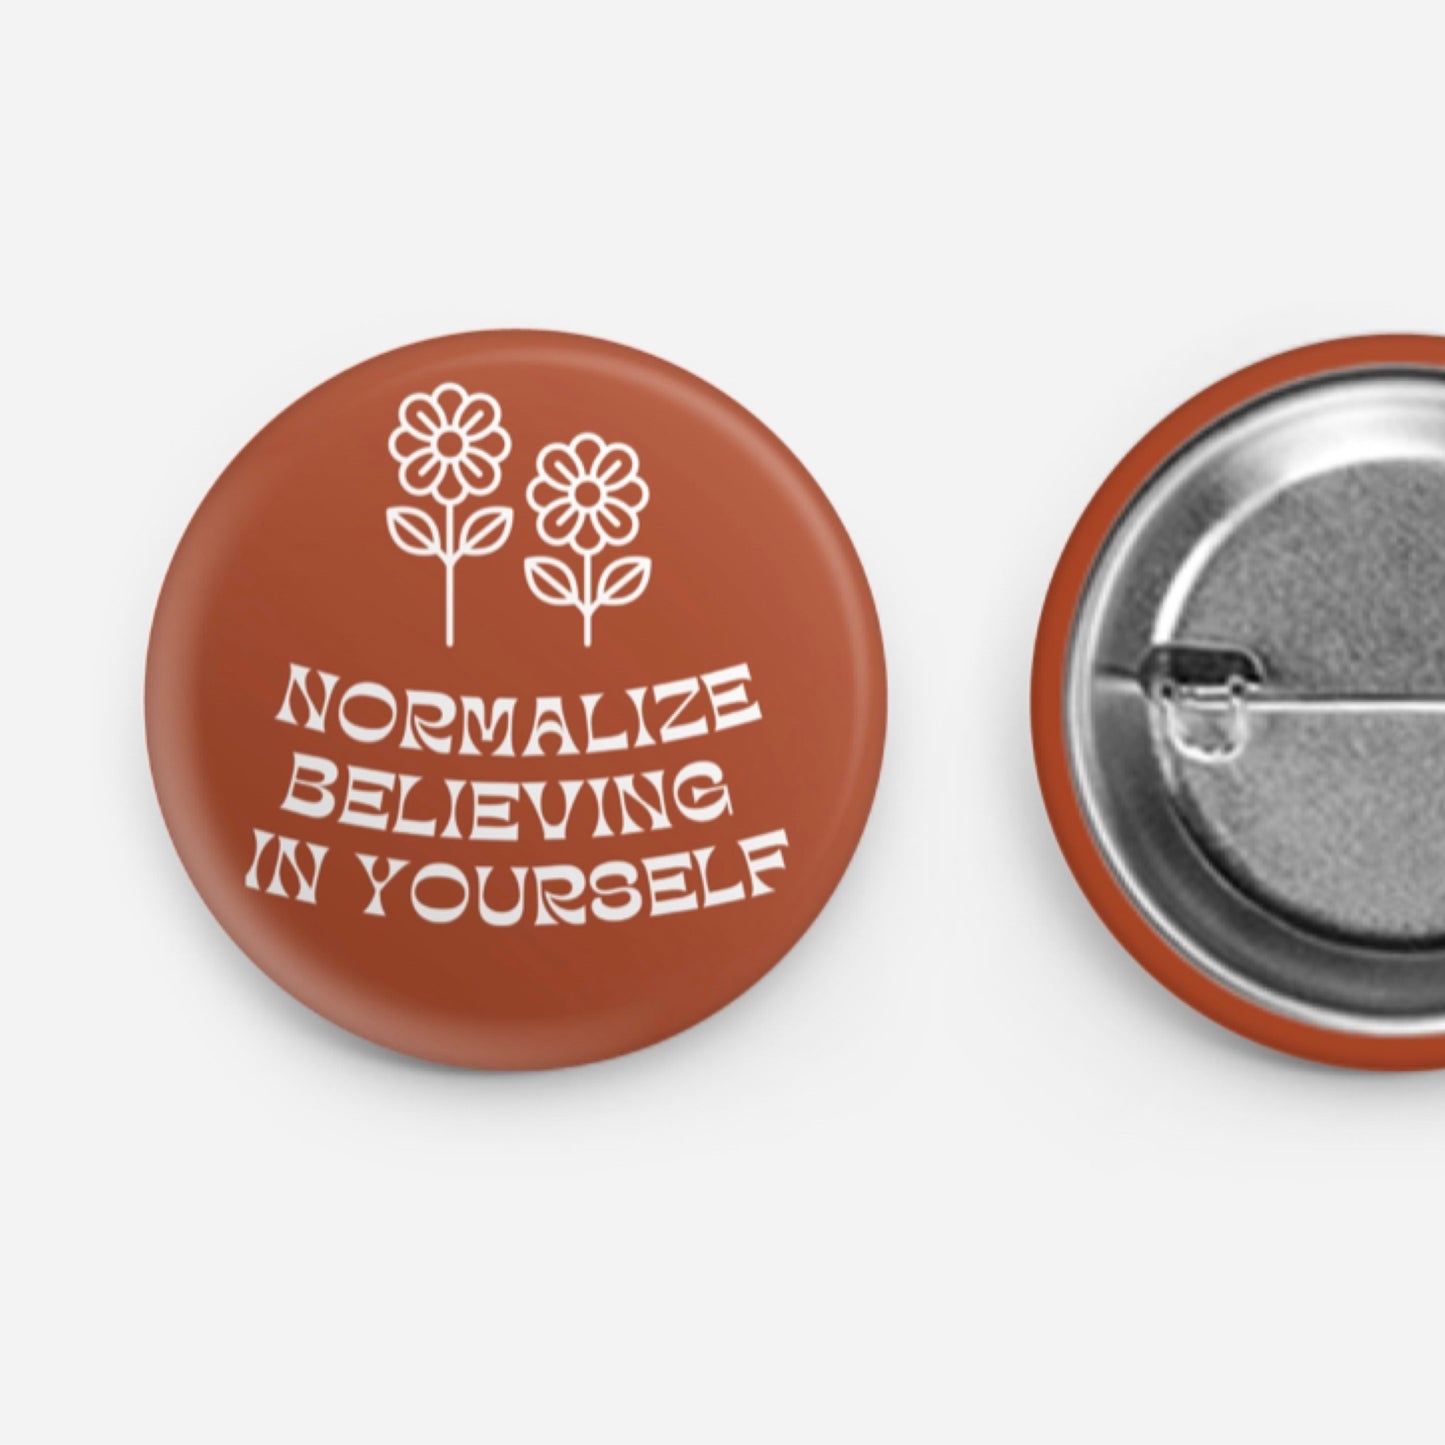 Normalize Believing in yourself button